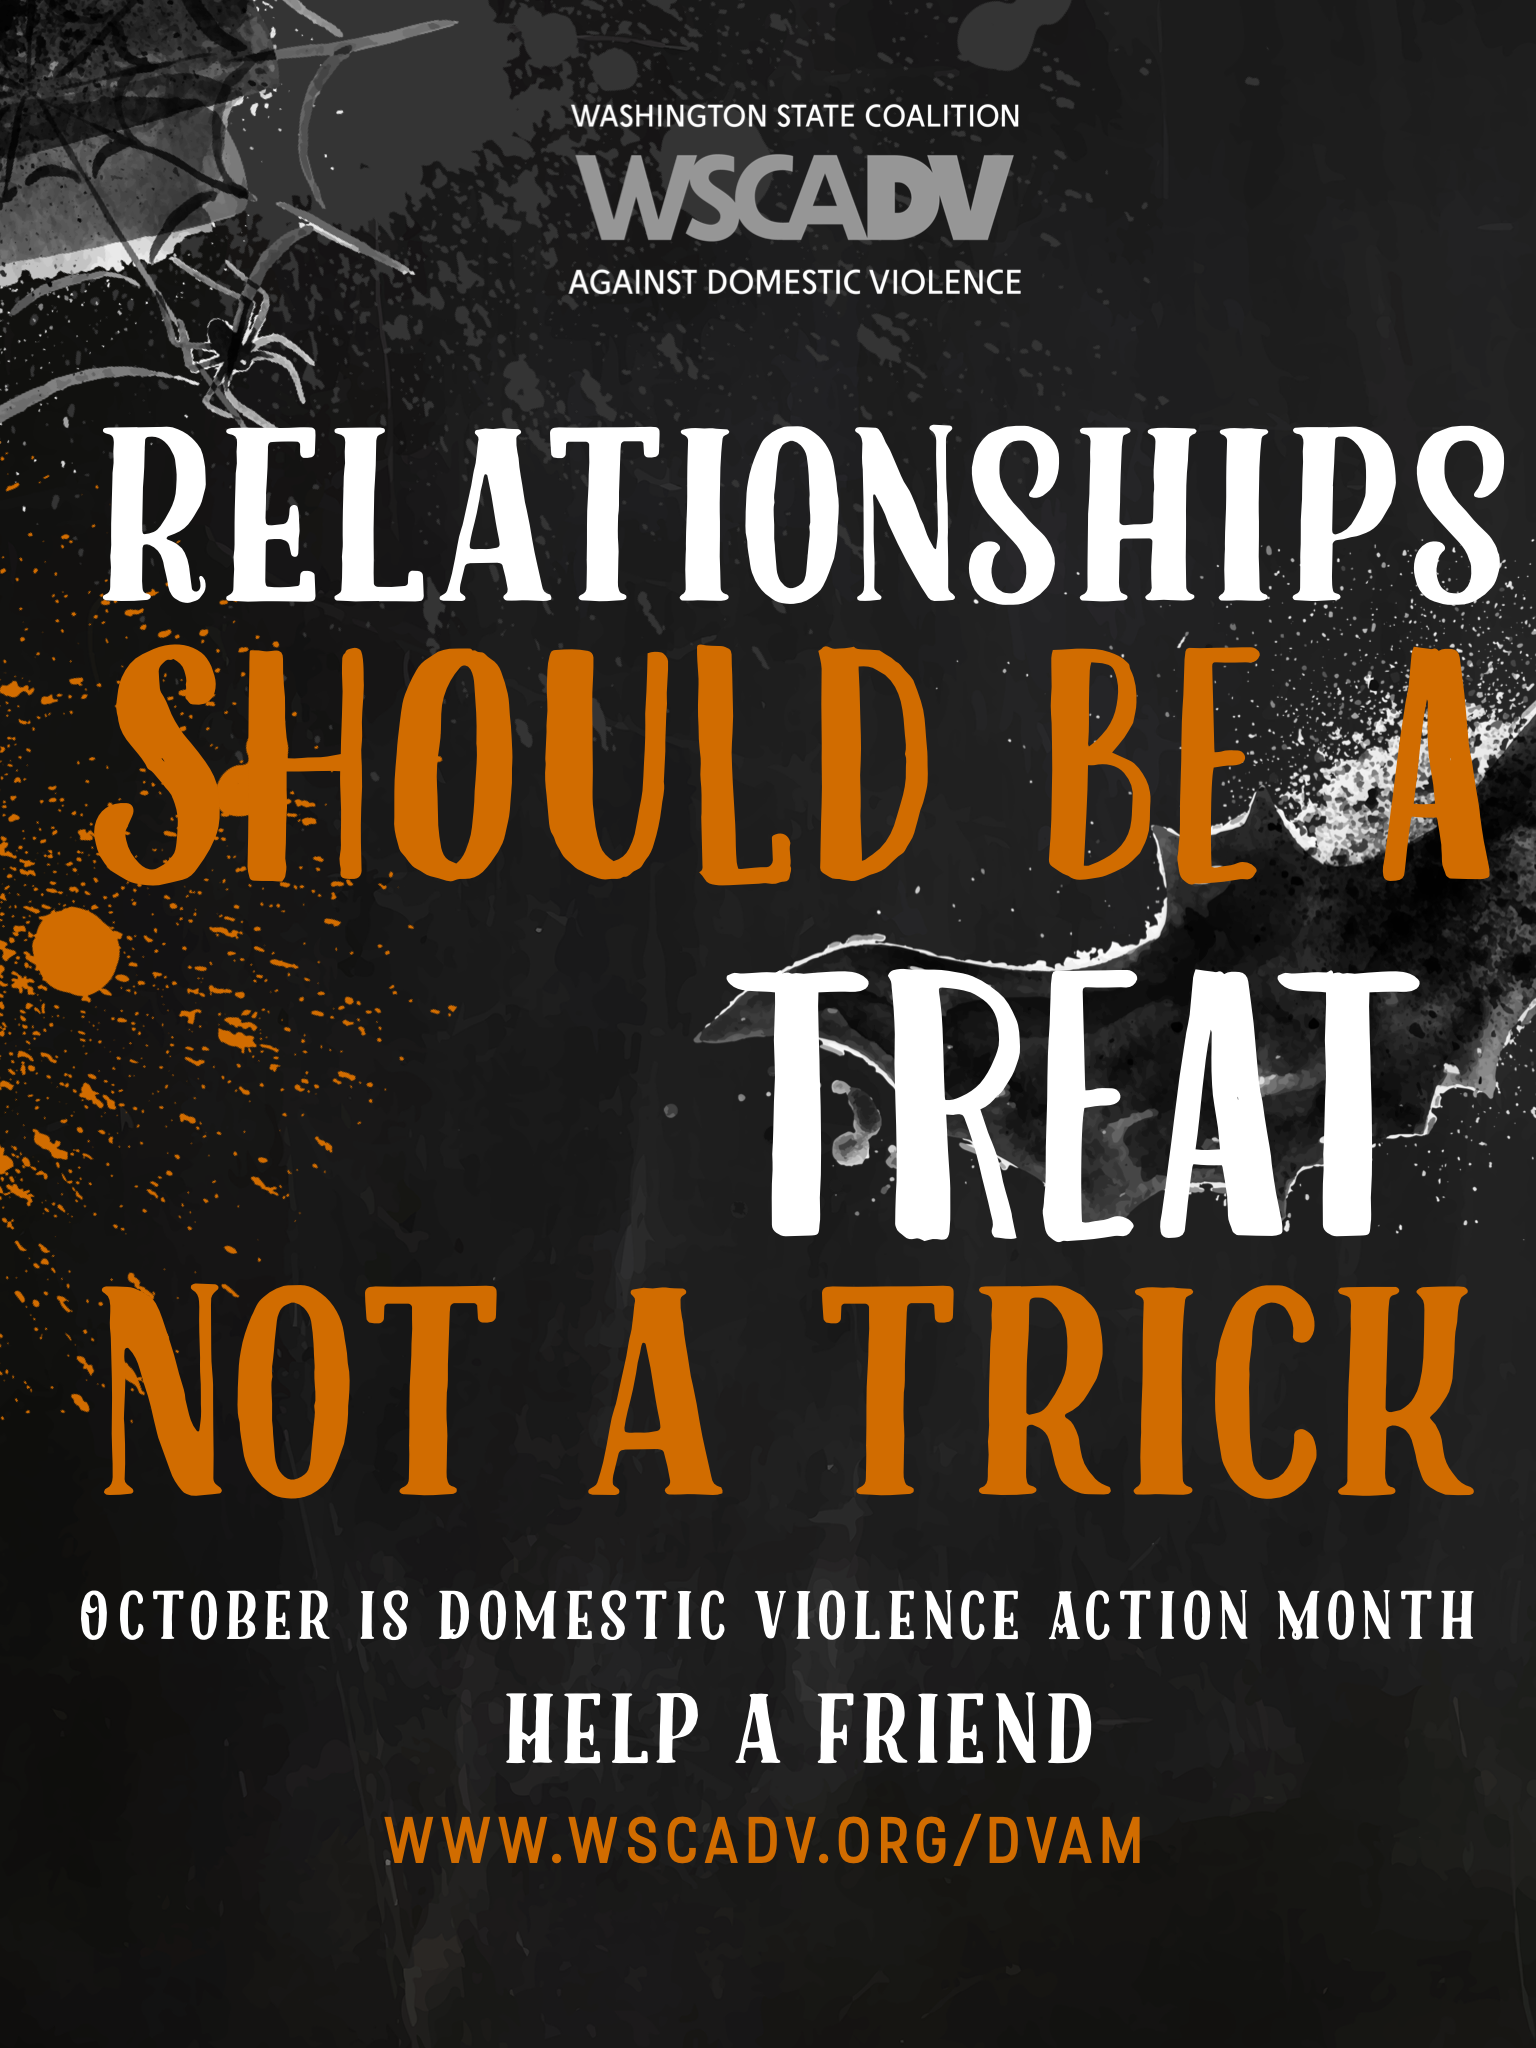 Halloween themed image for Domestic Violence Action Month of a black background with spider webs and bats. Over the images, in white and orange text, the message reads: Relationships should be a treat, not a trick. October is Domestic Violence Action Month. Help a friend. www.wscadv.org/dvam